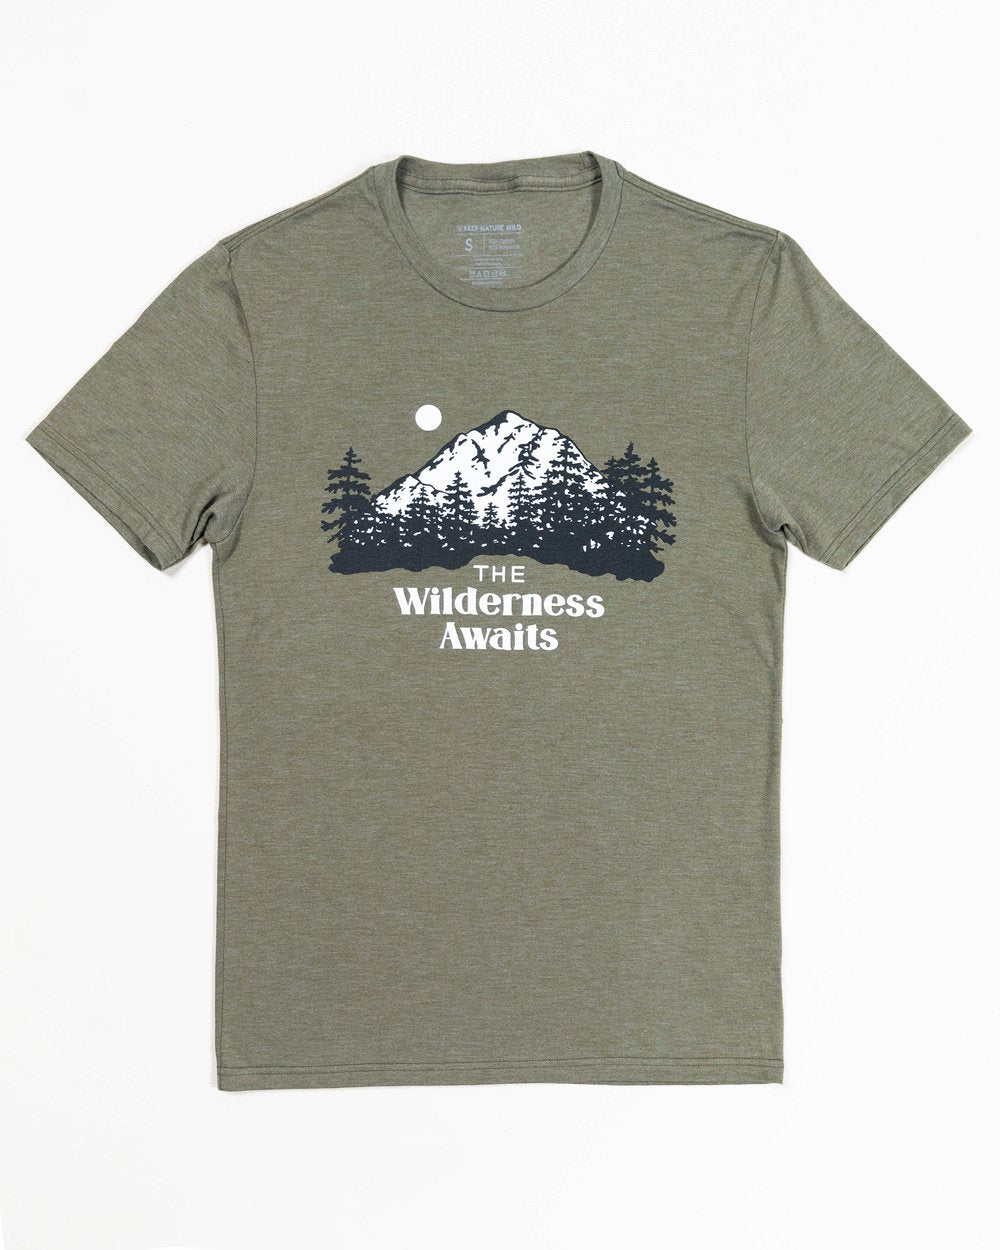 Wilderness Awaits Recycled Unisex Olive Tee